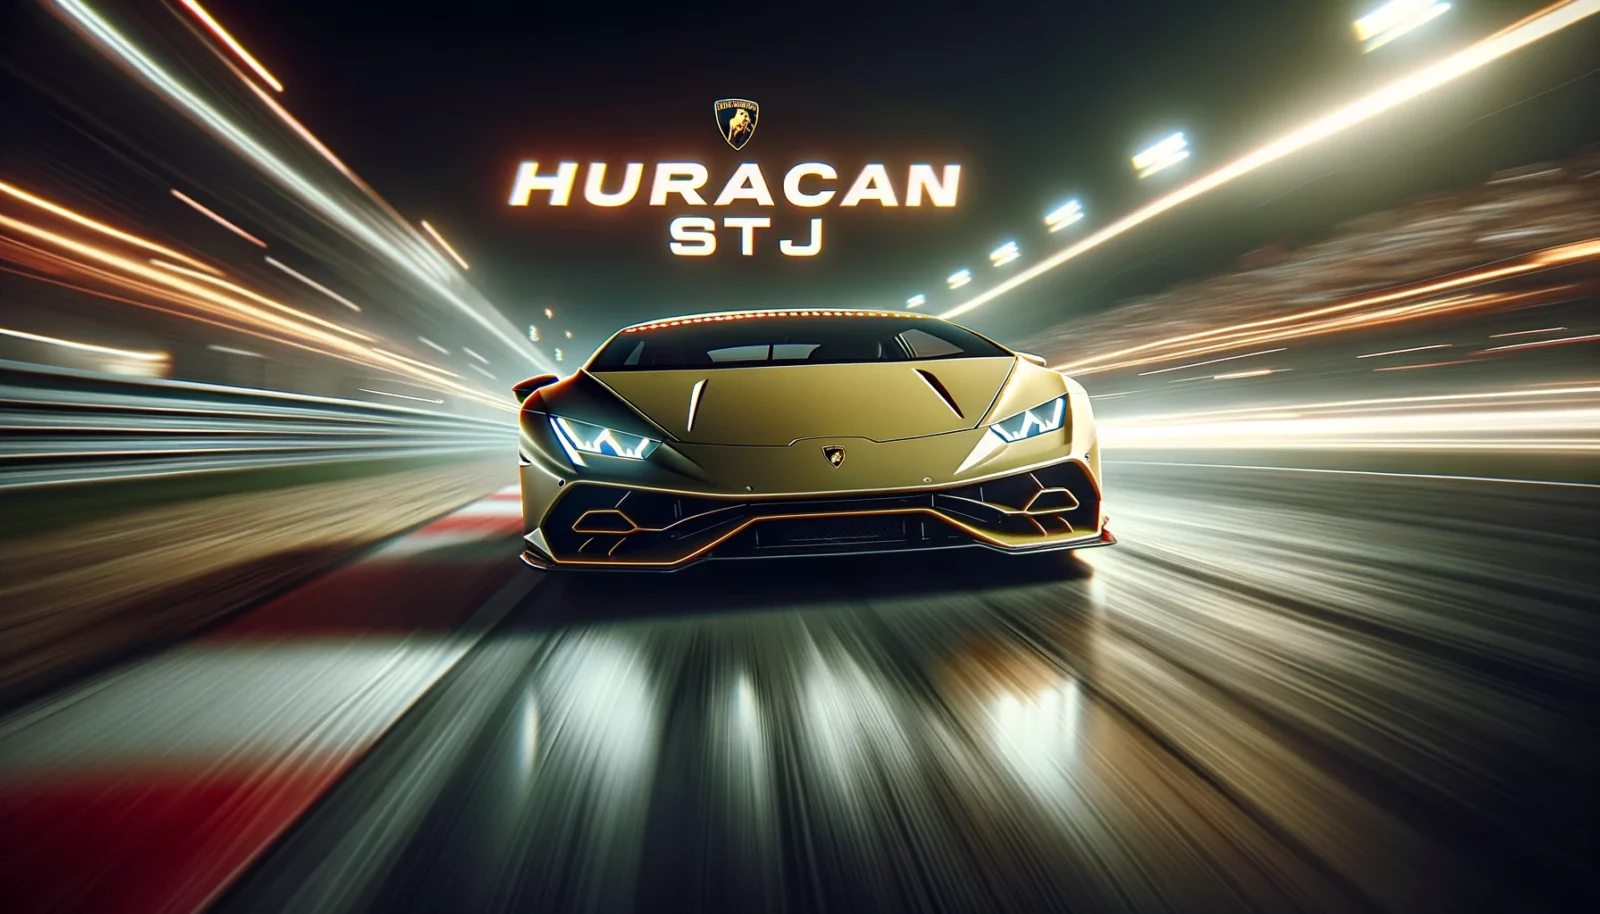 DALL·E 2024 02 28 17.46.41 Create a photorealistic image where the focus is on the text Huracan STJ displayed prominently in the foreground with a Lamborghini Huracan subtly